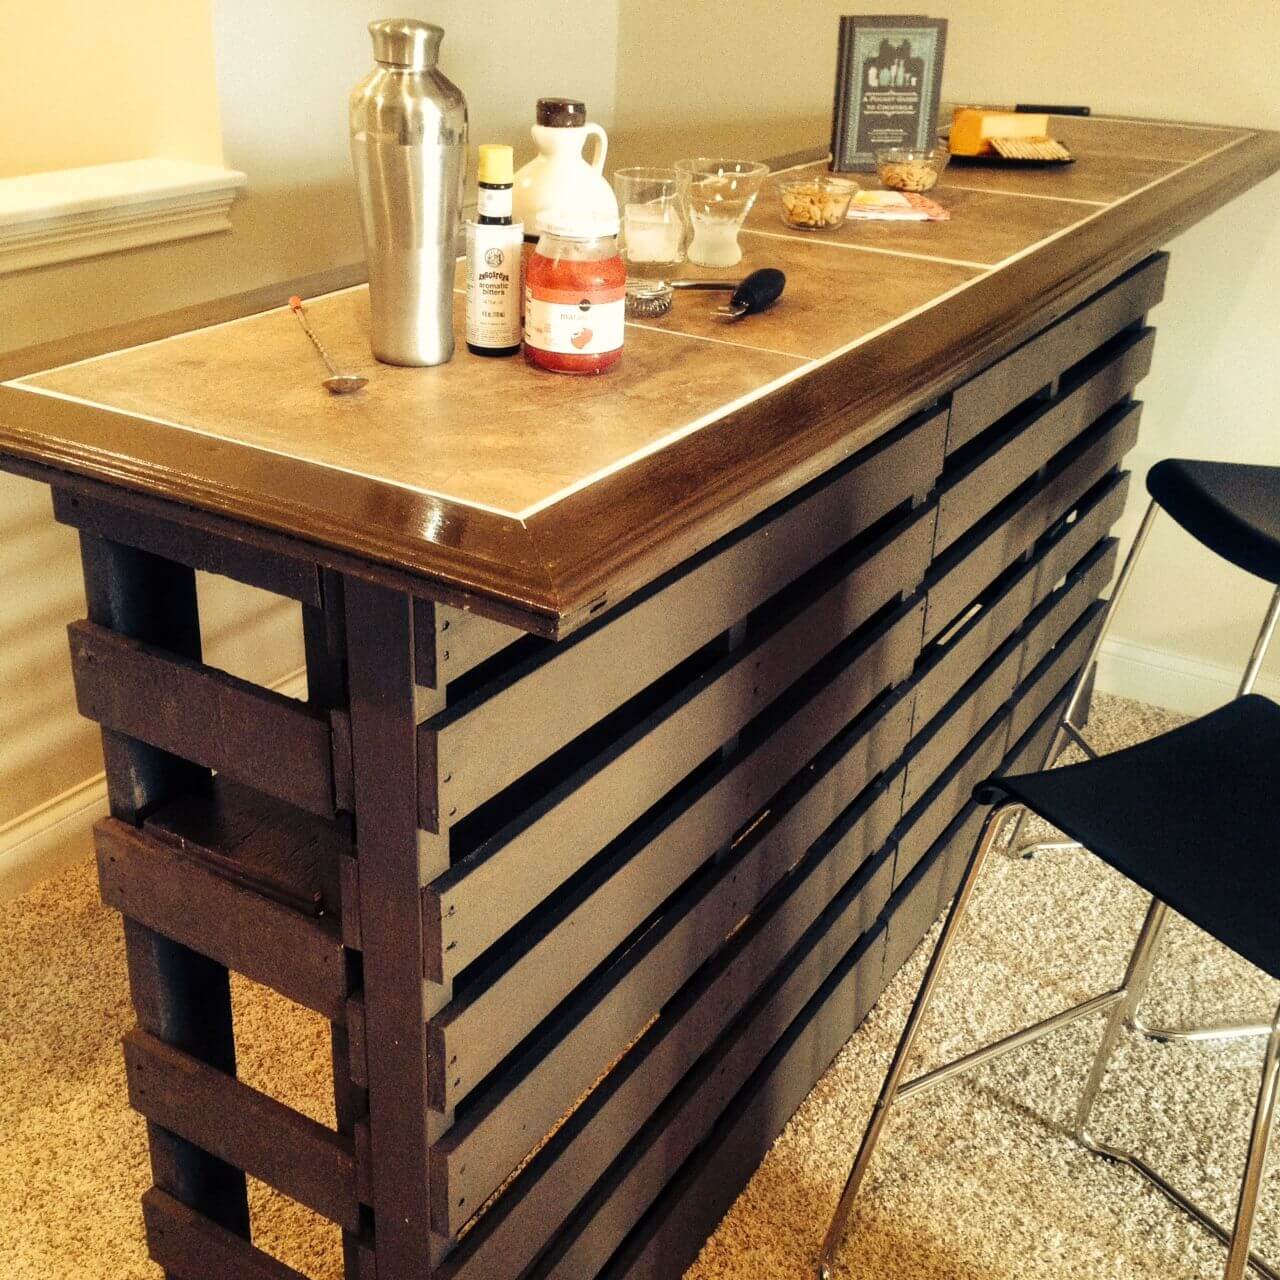 Pallet Bar Topped with Ceramic Tile